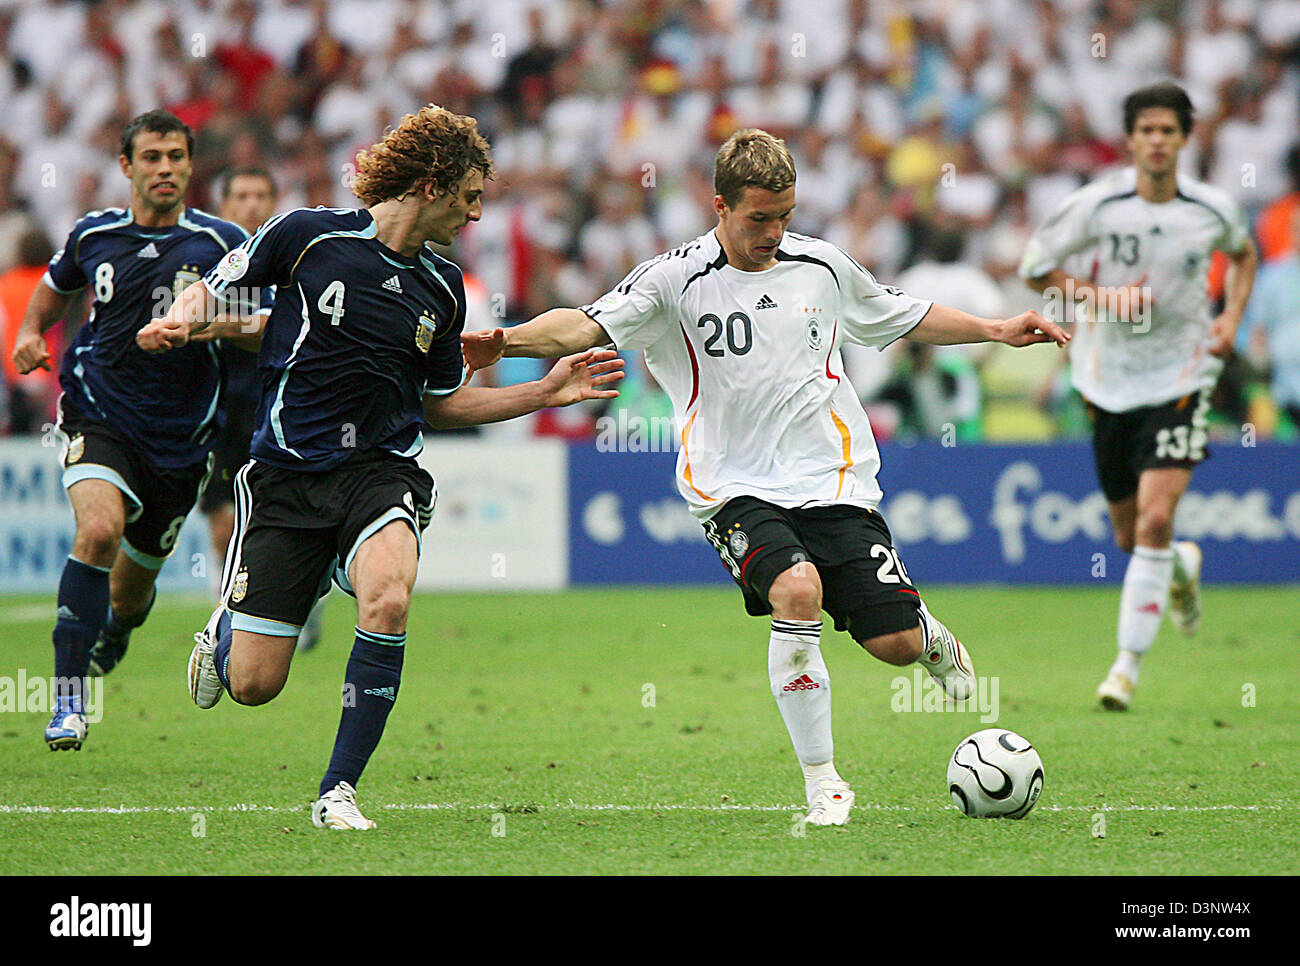 German national soccer player Lukas Podoalski (2nd R) shoots the ball, while Fabricio Coloccini (2nd L), Javier Mascherano (L) of Argentina and Michael Ballack (R) of Germany watch the scene during the World Cup quarter final against Argentina at the Olympic Stadium in Berlin, Friday, 30 June 2006. Germany won the quarter final 5:3 on penalties. Photo: Michael Hanschke +++ Mobile S Stock Photo